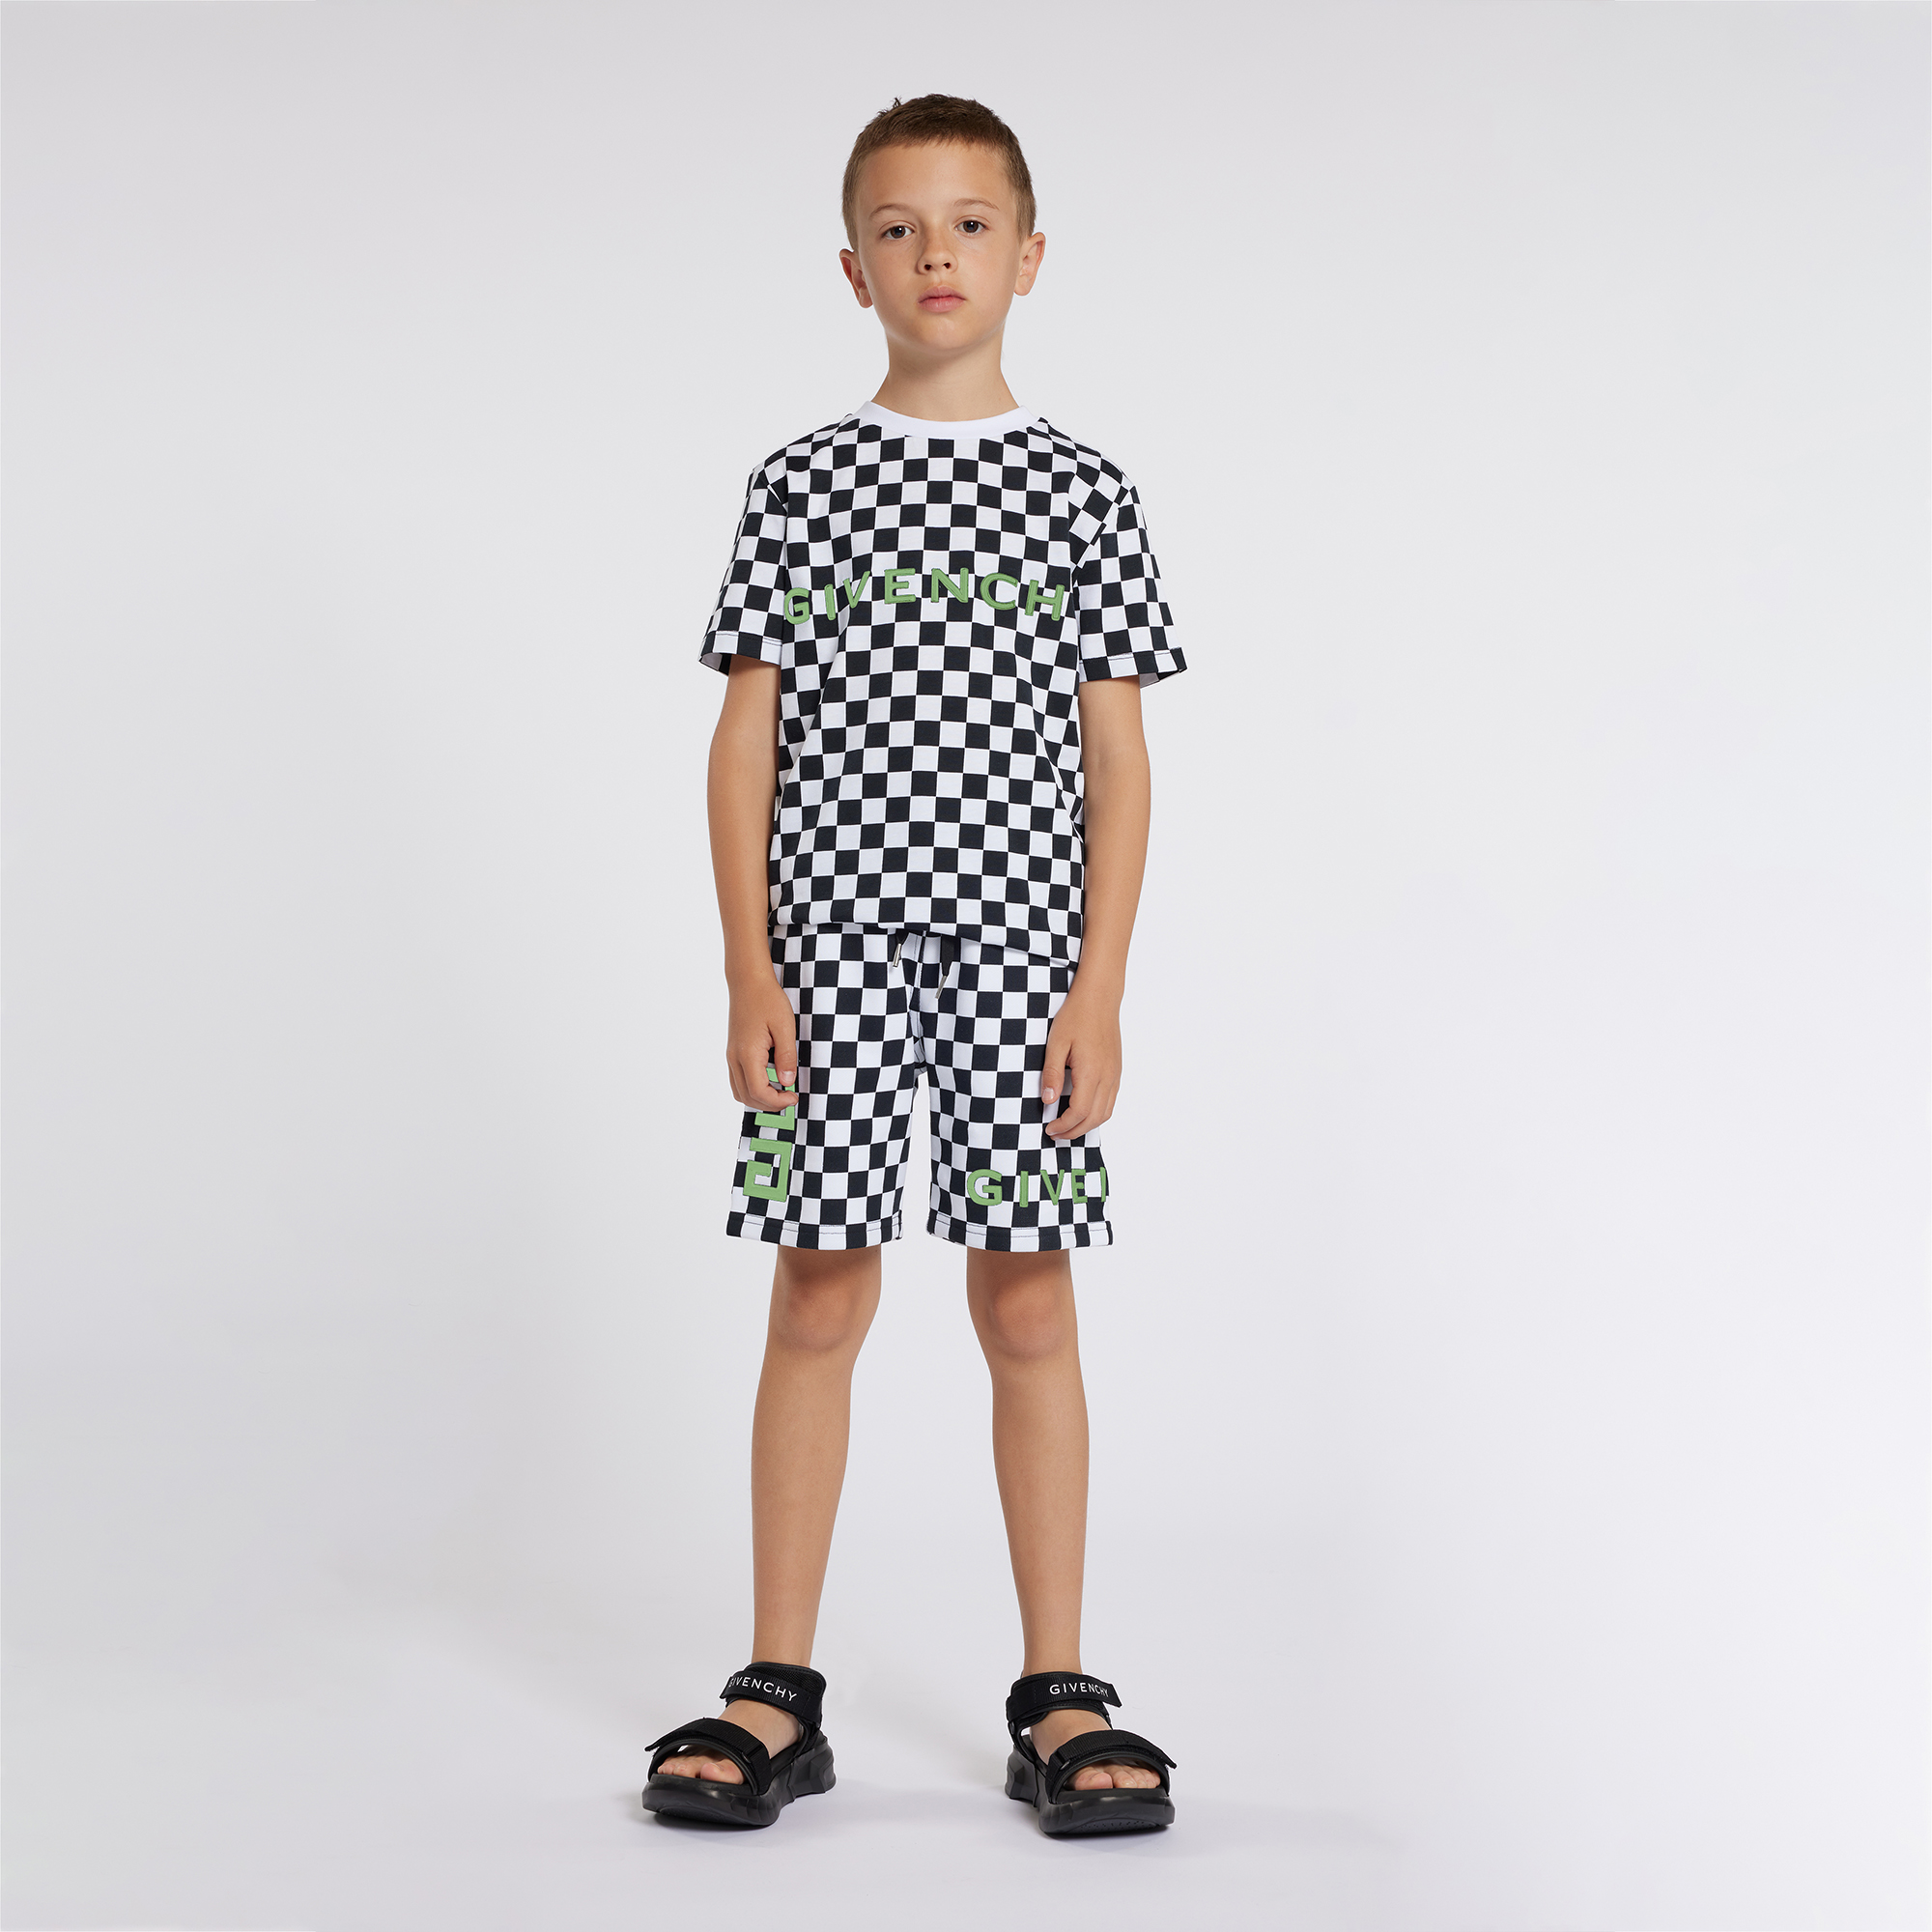 Hook-and-loop printed sandals GIVENCHY for BOY